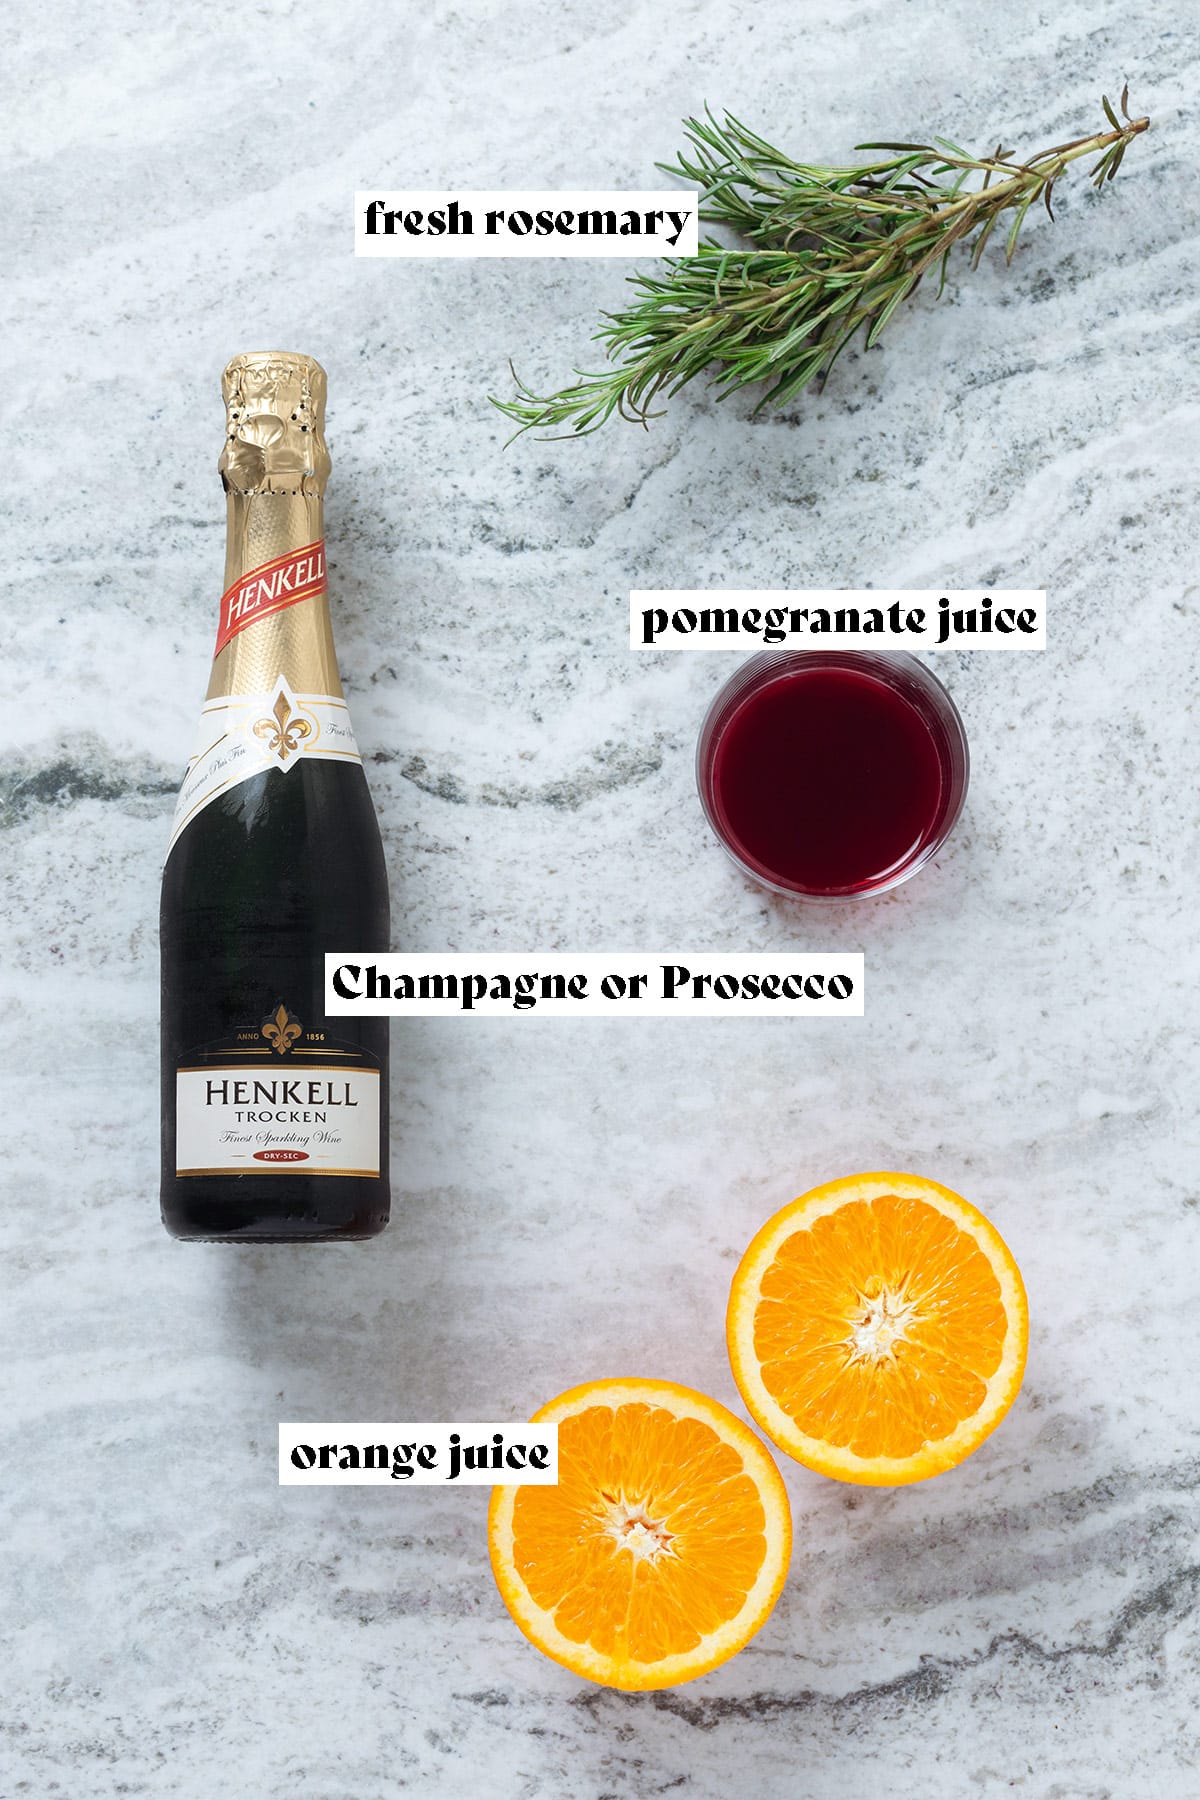 A bottle of prosecco, fresh rosemary, an orange, and pomegranate juice in a glass on a grey stone background with text overlay.